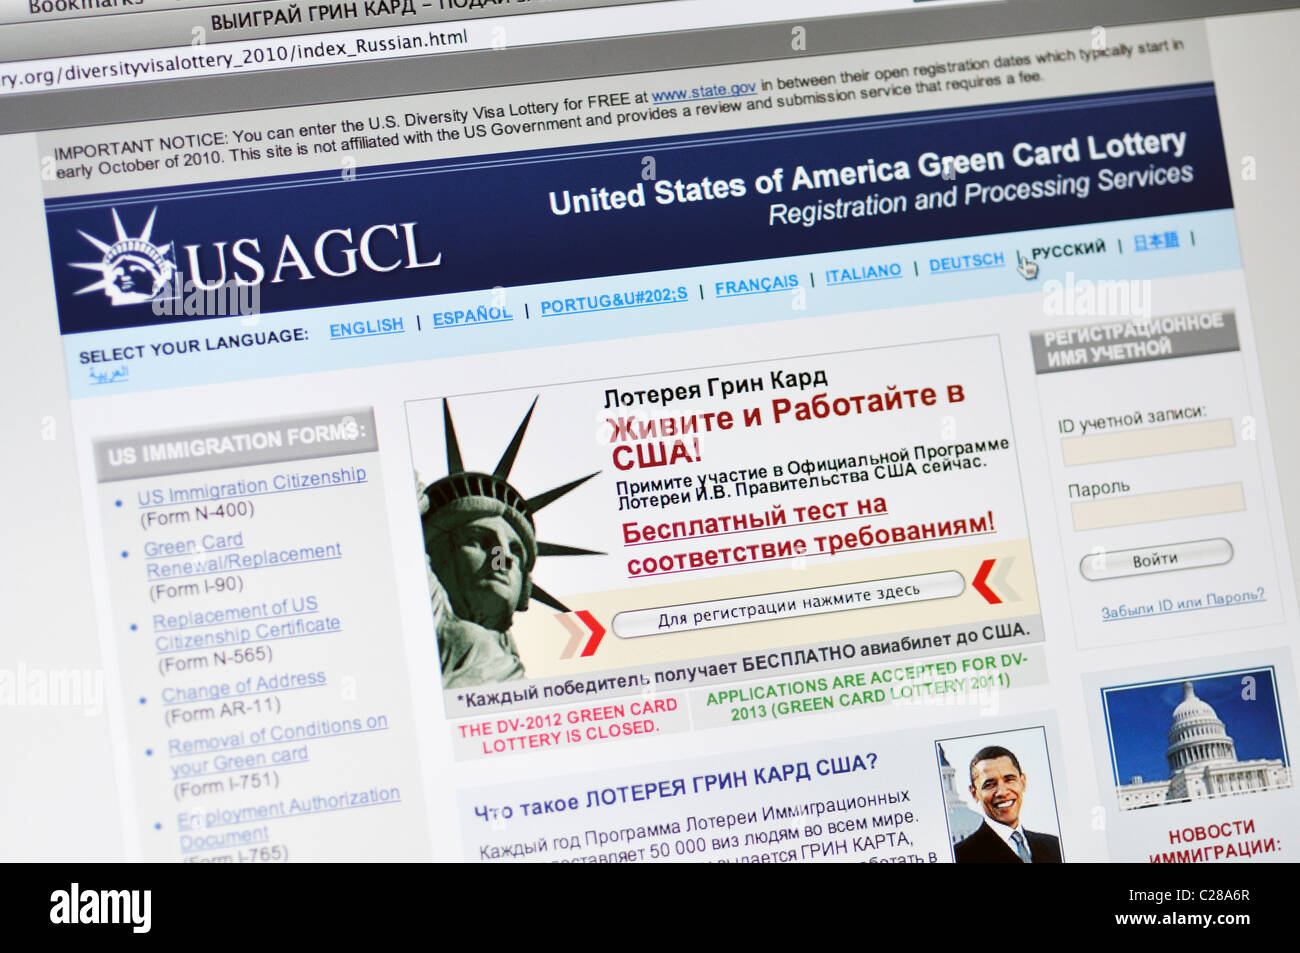 USAGCL website - United States of America Green Card Lottery - in Russian Stock Photo